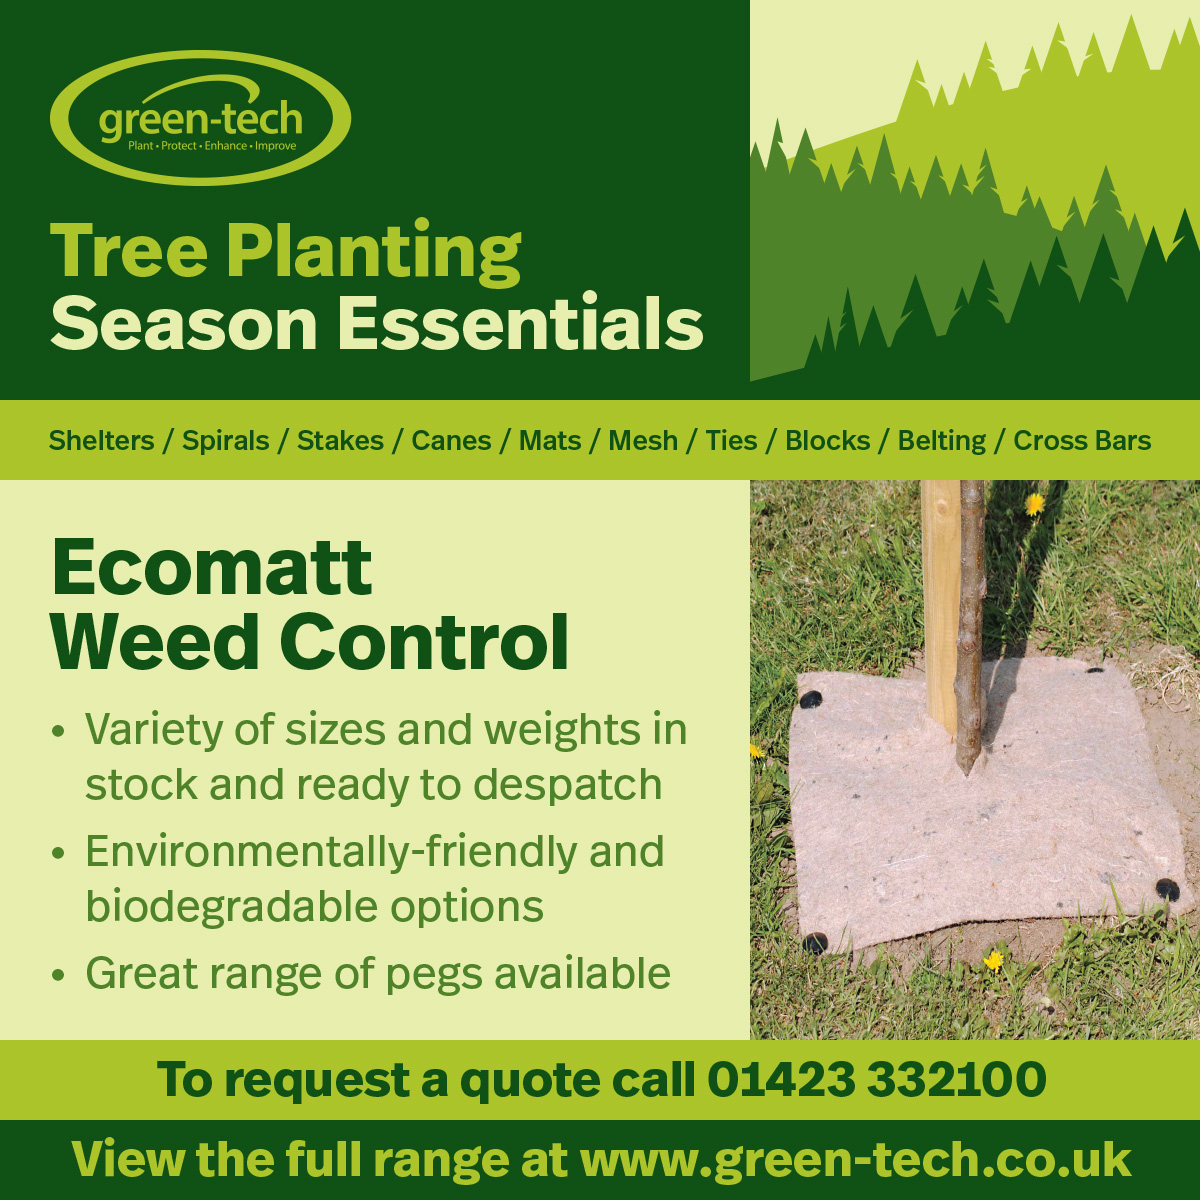 We stock a range of weed mulch mats at #TeamGT, including the Ecomatt Weed Control mat! This #EnvironmentallyFriendly mat contains no plastics and is 100% #biodegradable. The Ecomatt is a must have for your #TreePlanting projects! T: 01423 332100 #WorkingTogether